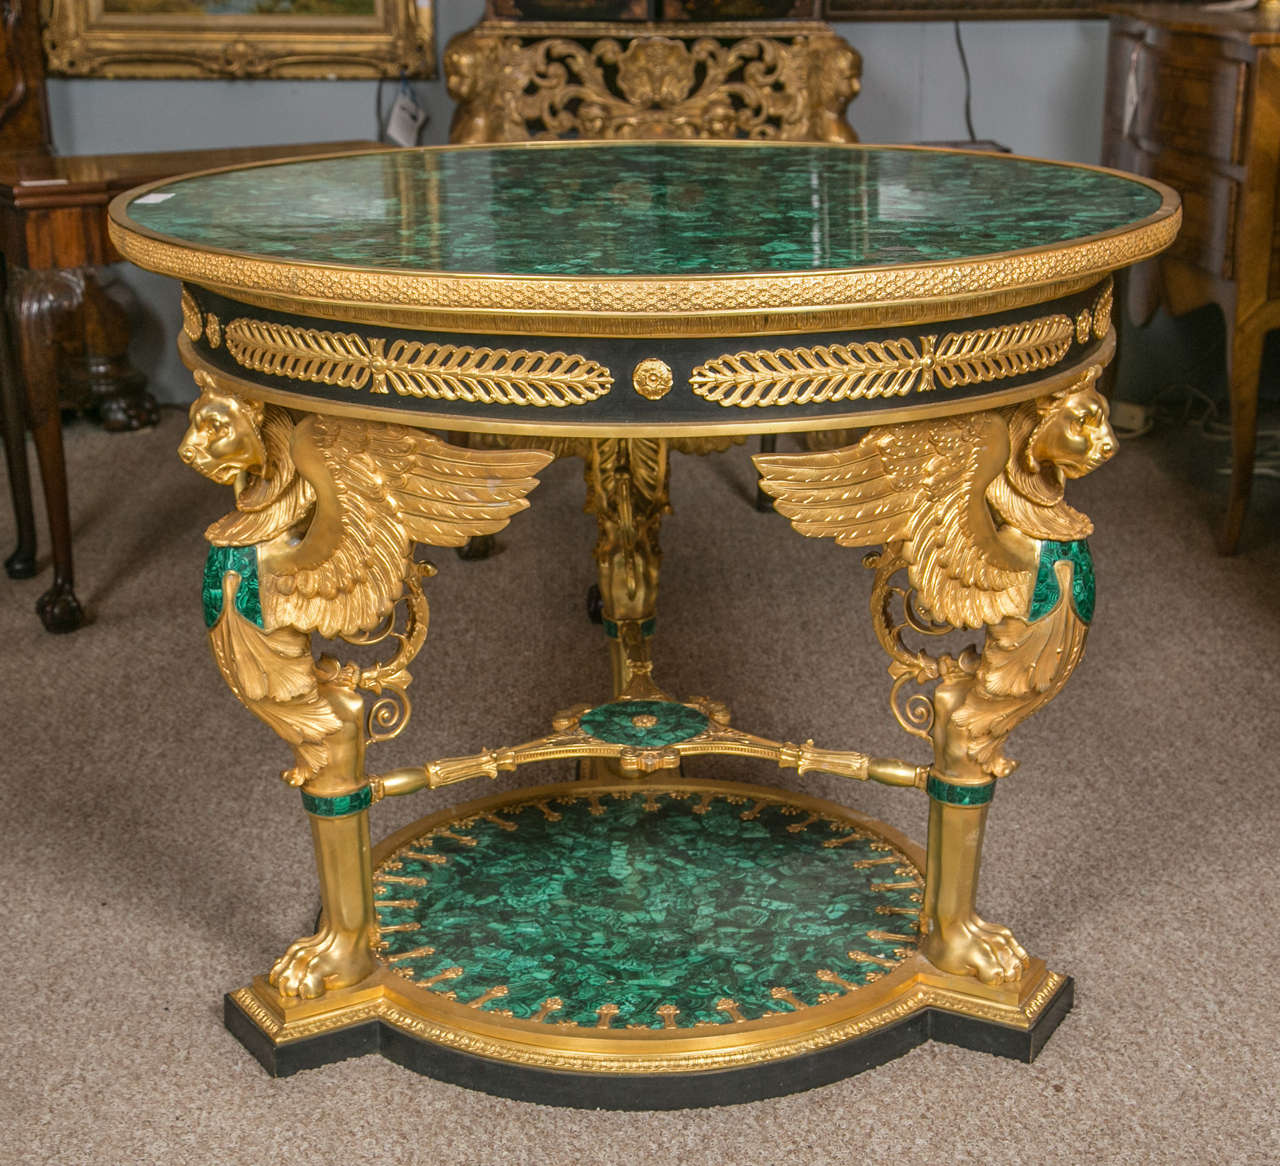 Fine doré bronze and malachite green figural center table. Russian Imperial style figural gilt bronze and malachite mounted table de Milieu, with figures of winged lions, acanthus leaf and wreaths.